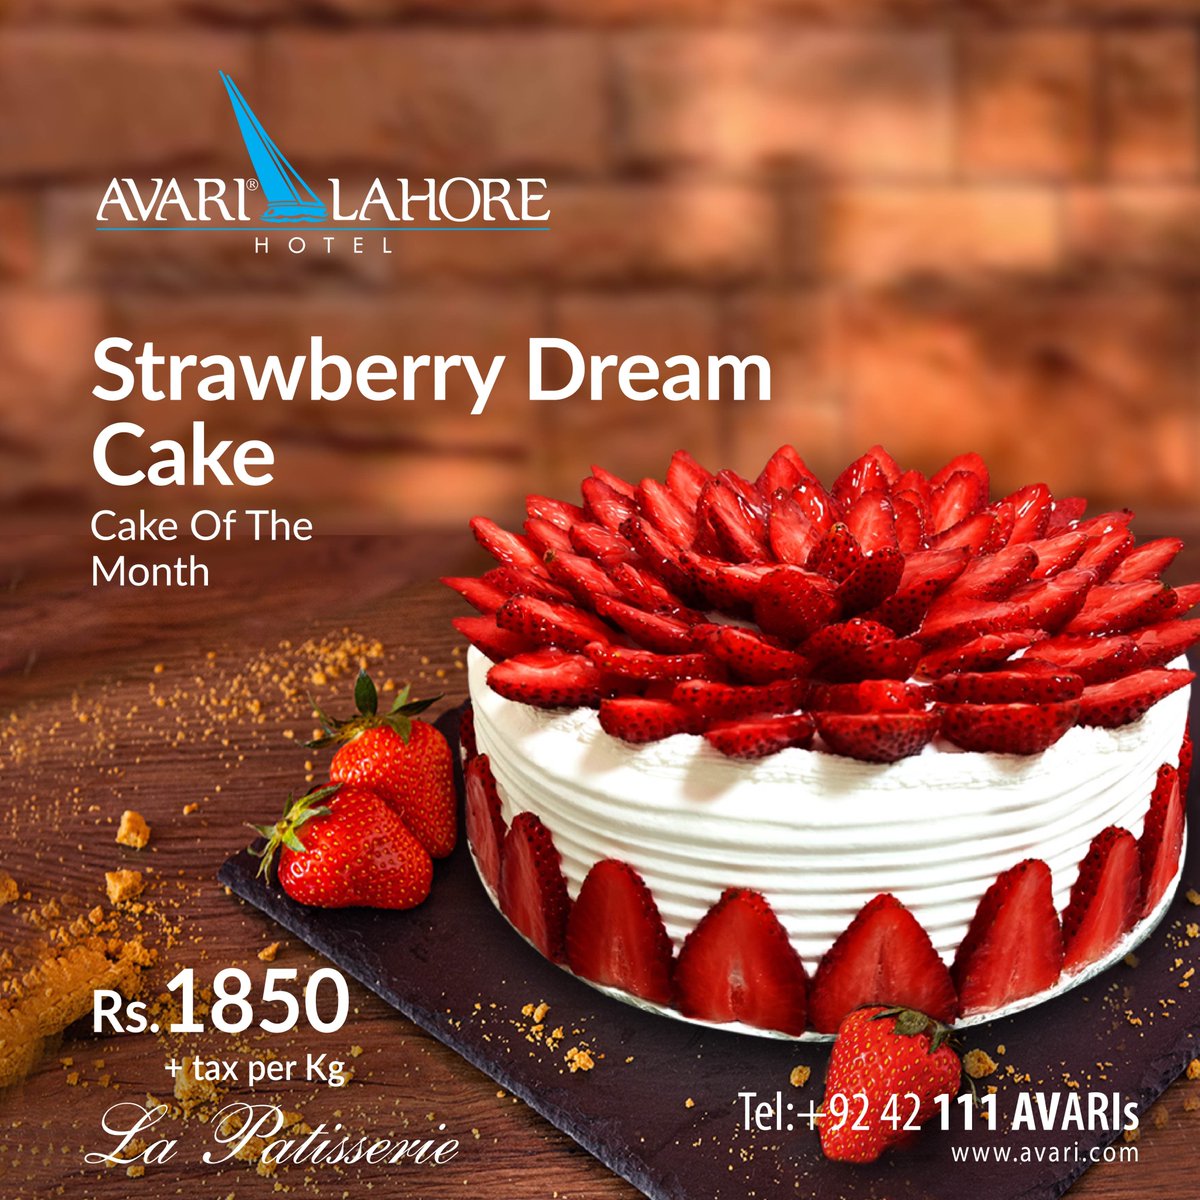 As Strawberry season begins don't miss our scrumptious Strawberry Dream Cake!!

#cakeofthemonth #lapatisserie #avarihotellahore #bakery #specialcakes #sweettooth #Lahore #strawberry #strawberryseason